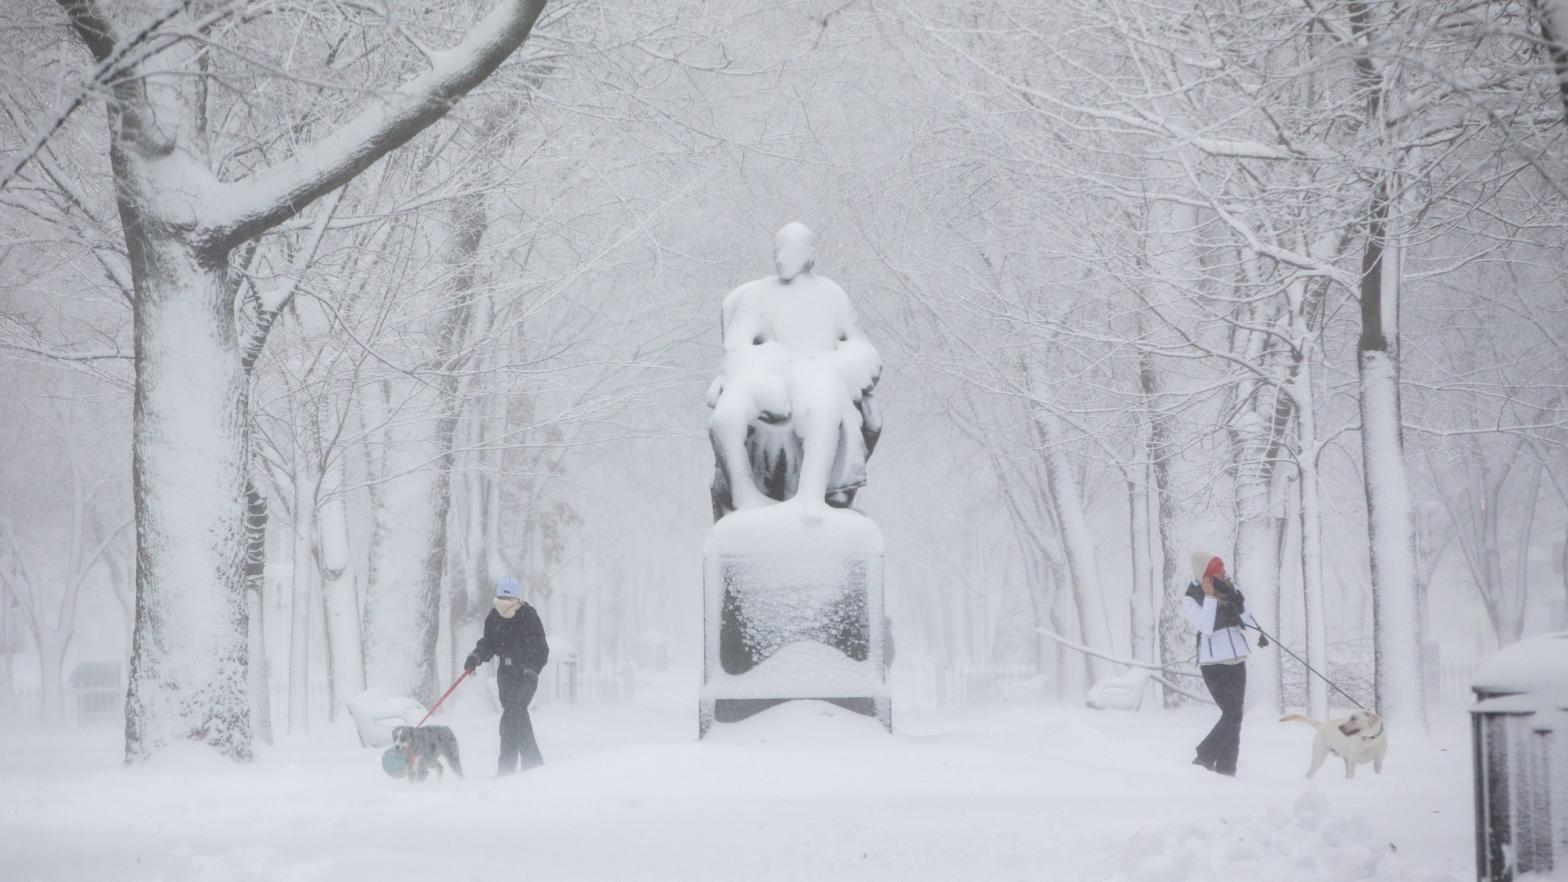 People walk their dogs on the snow-blanketed Commonwealth Mall on Dec, 17, 2020 in Boston. (Photo: Scott Eisen, Getty Images)